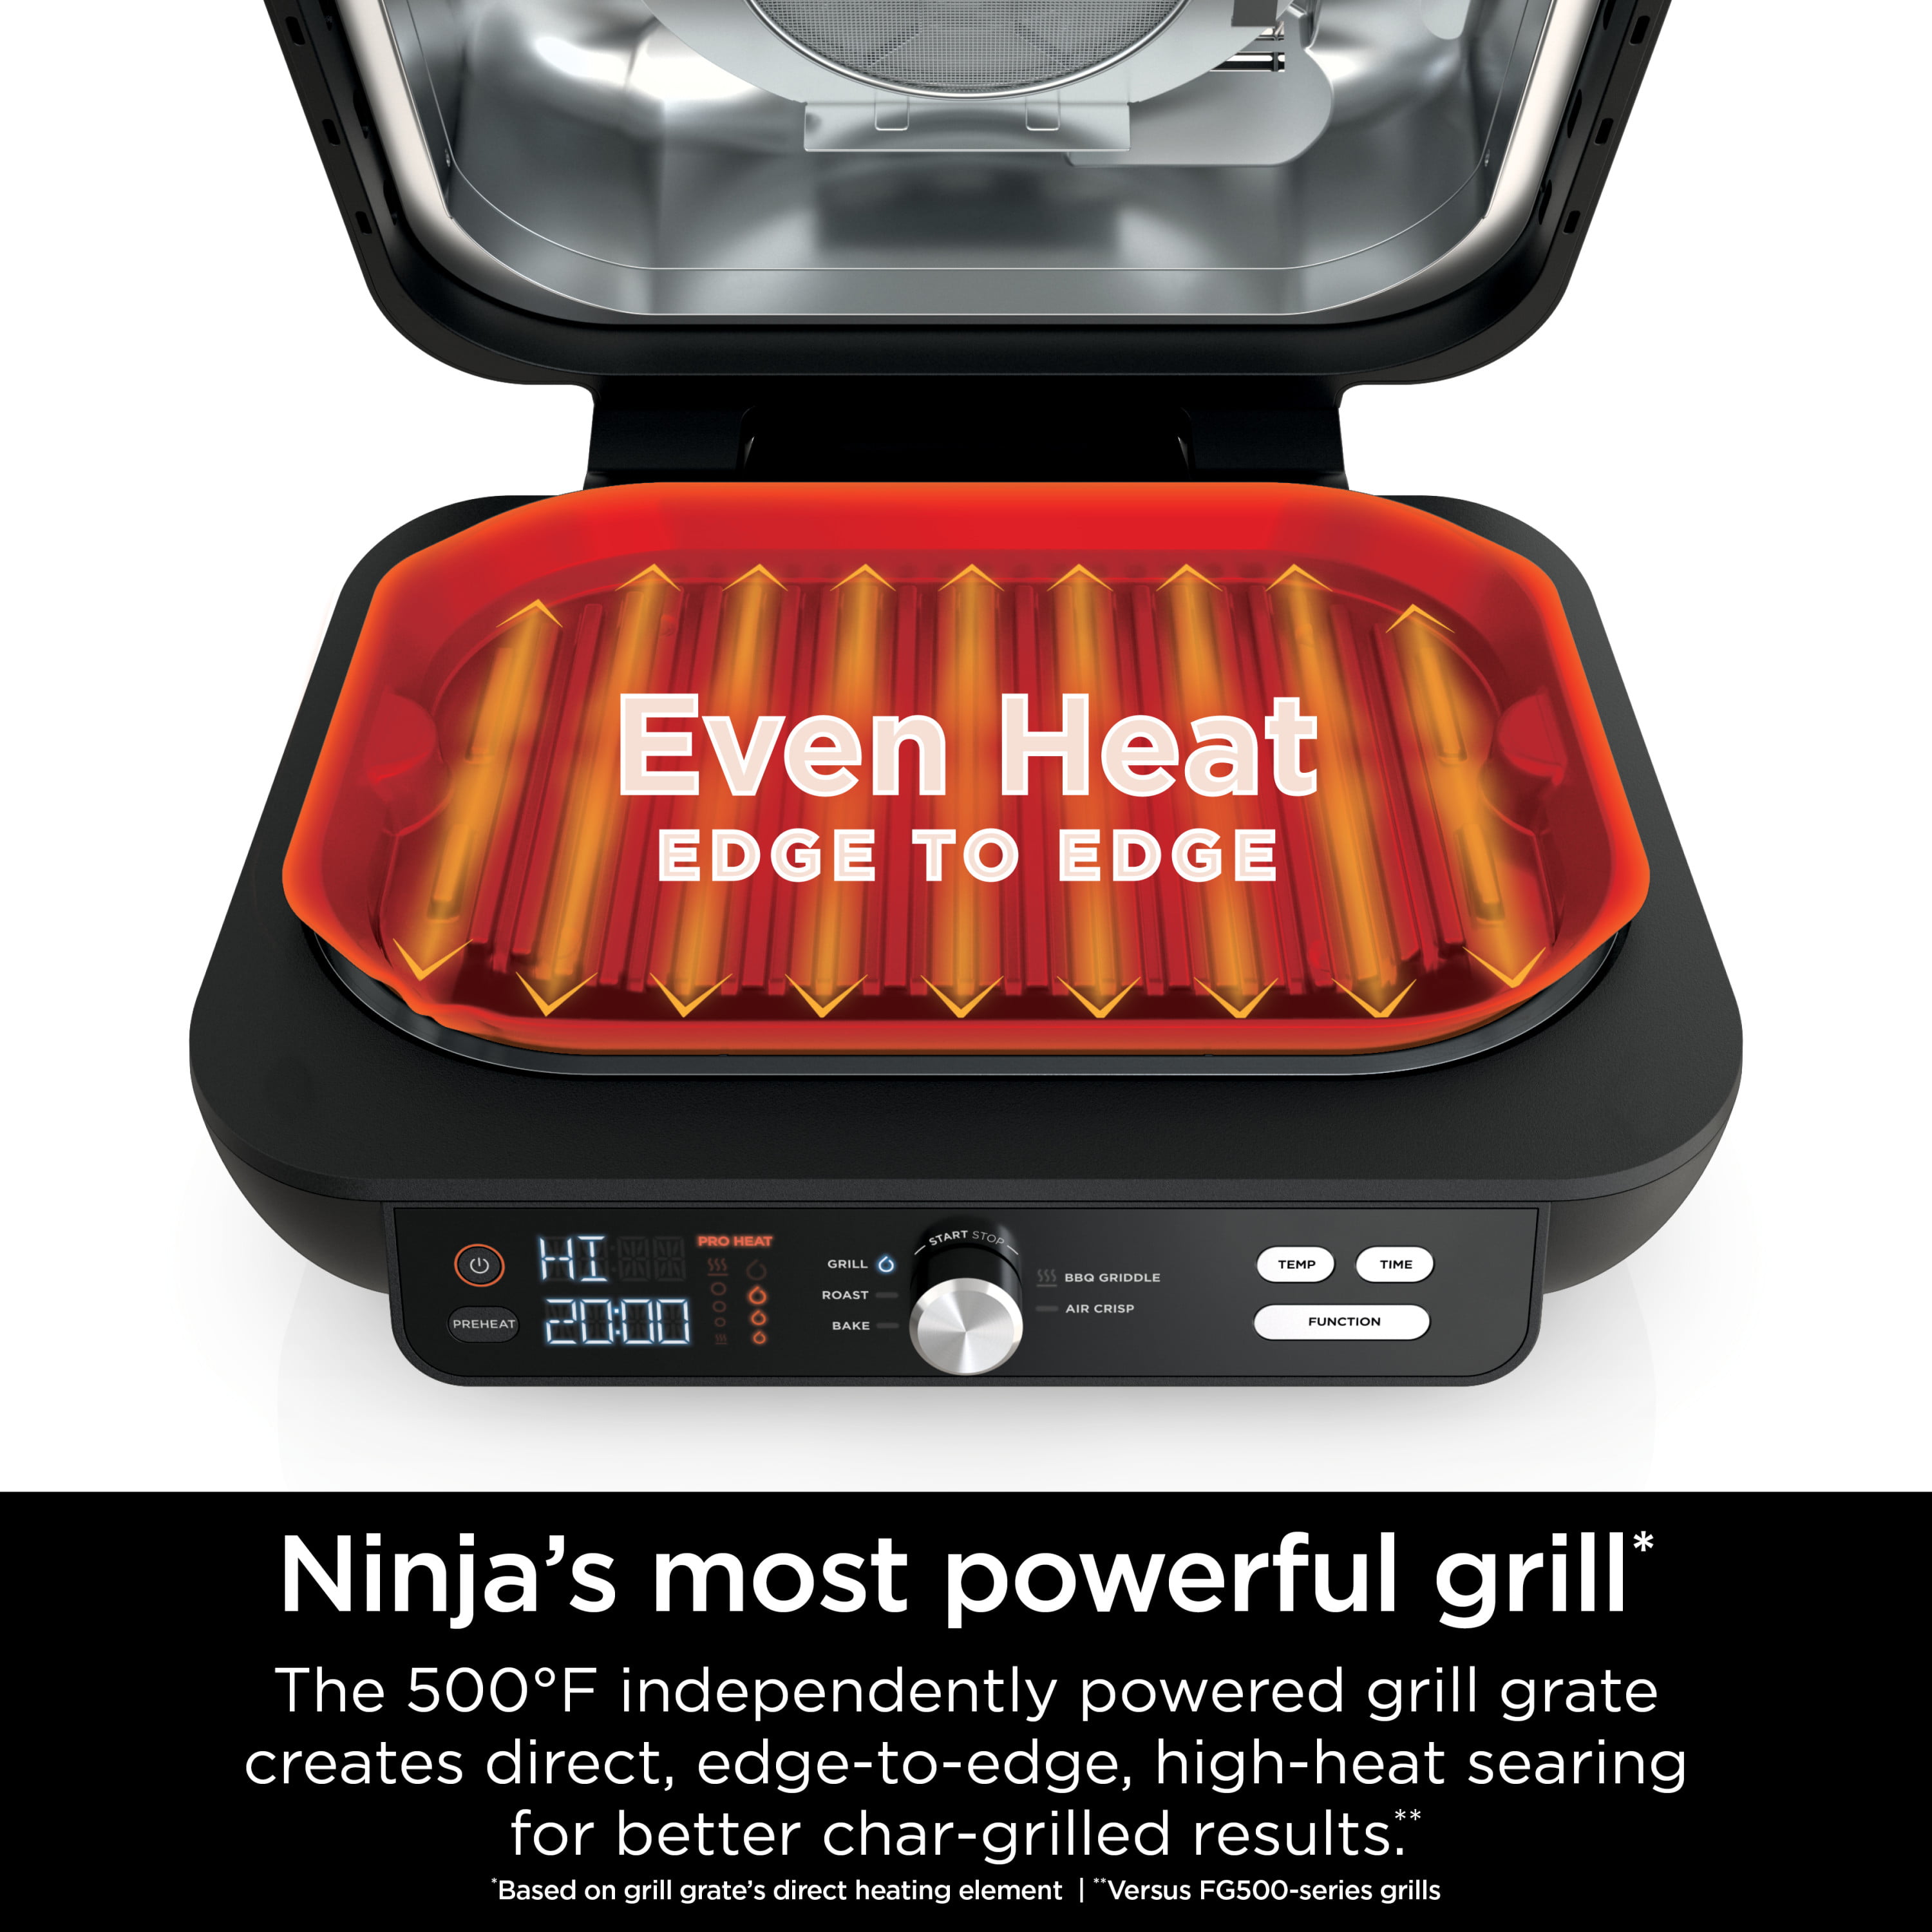 Ninja Foodi XL Pro 9-in-1 Smart Grill with Griddle